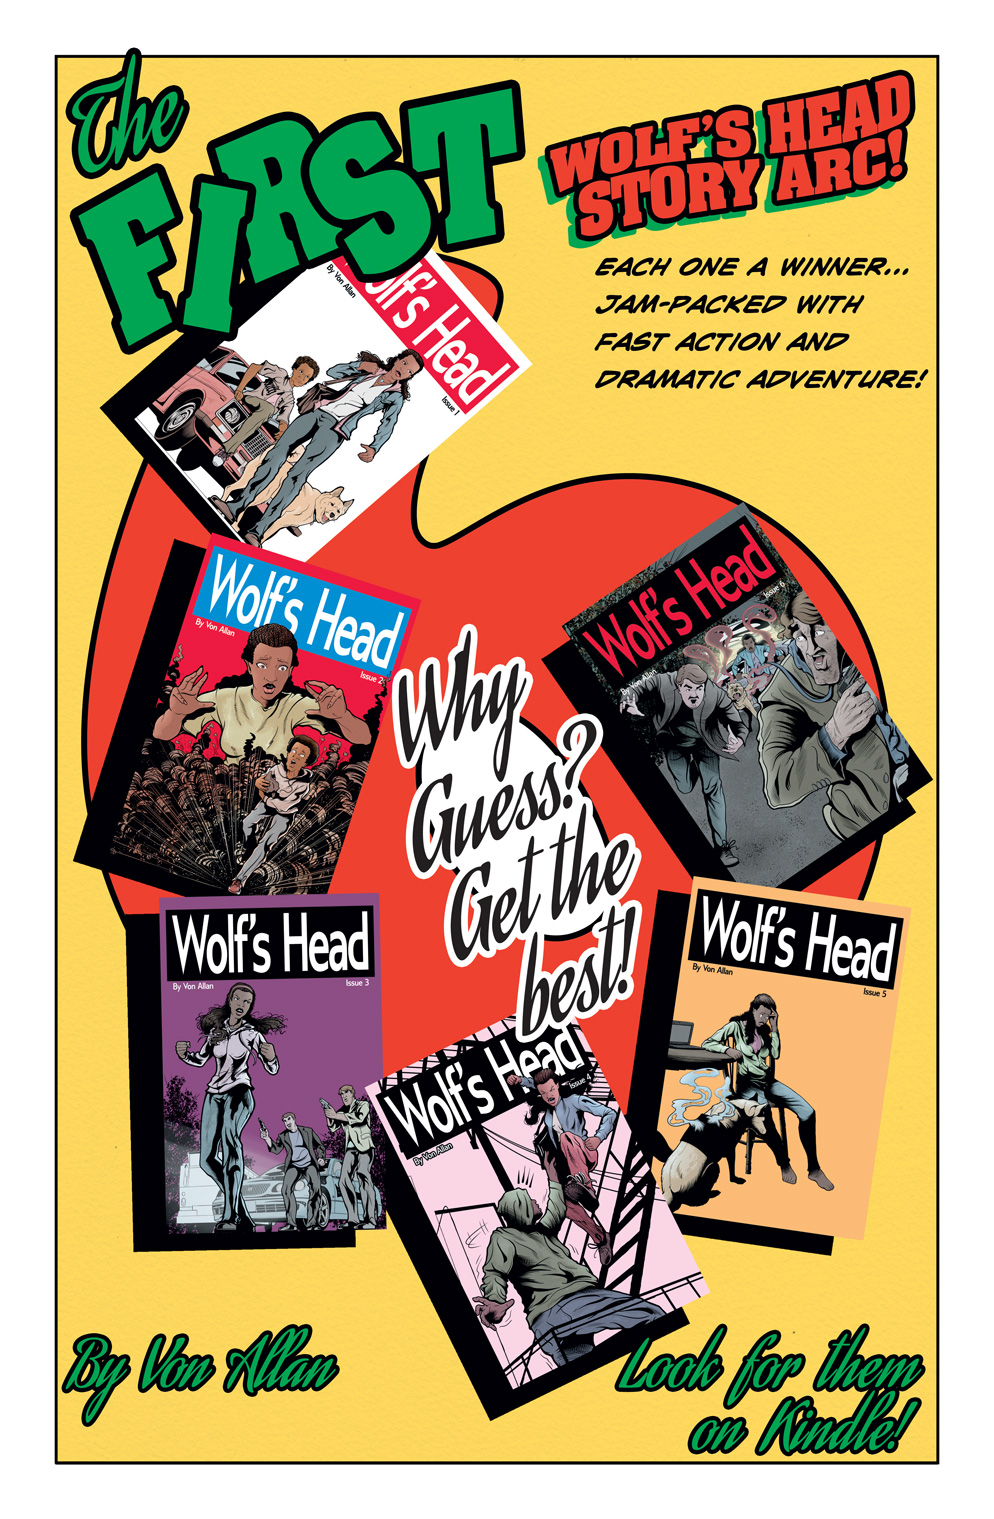 Teaser image featuring a montage of the first six issues of Wolf's Head